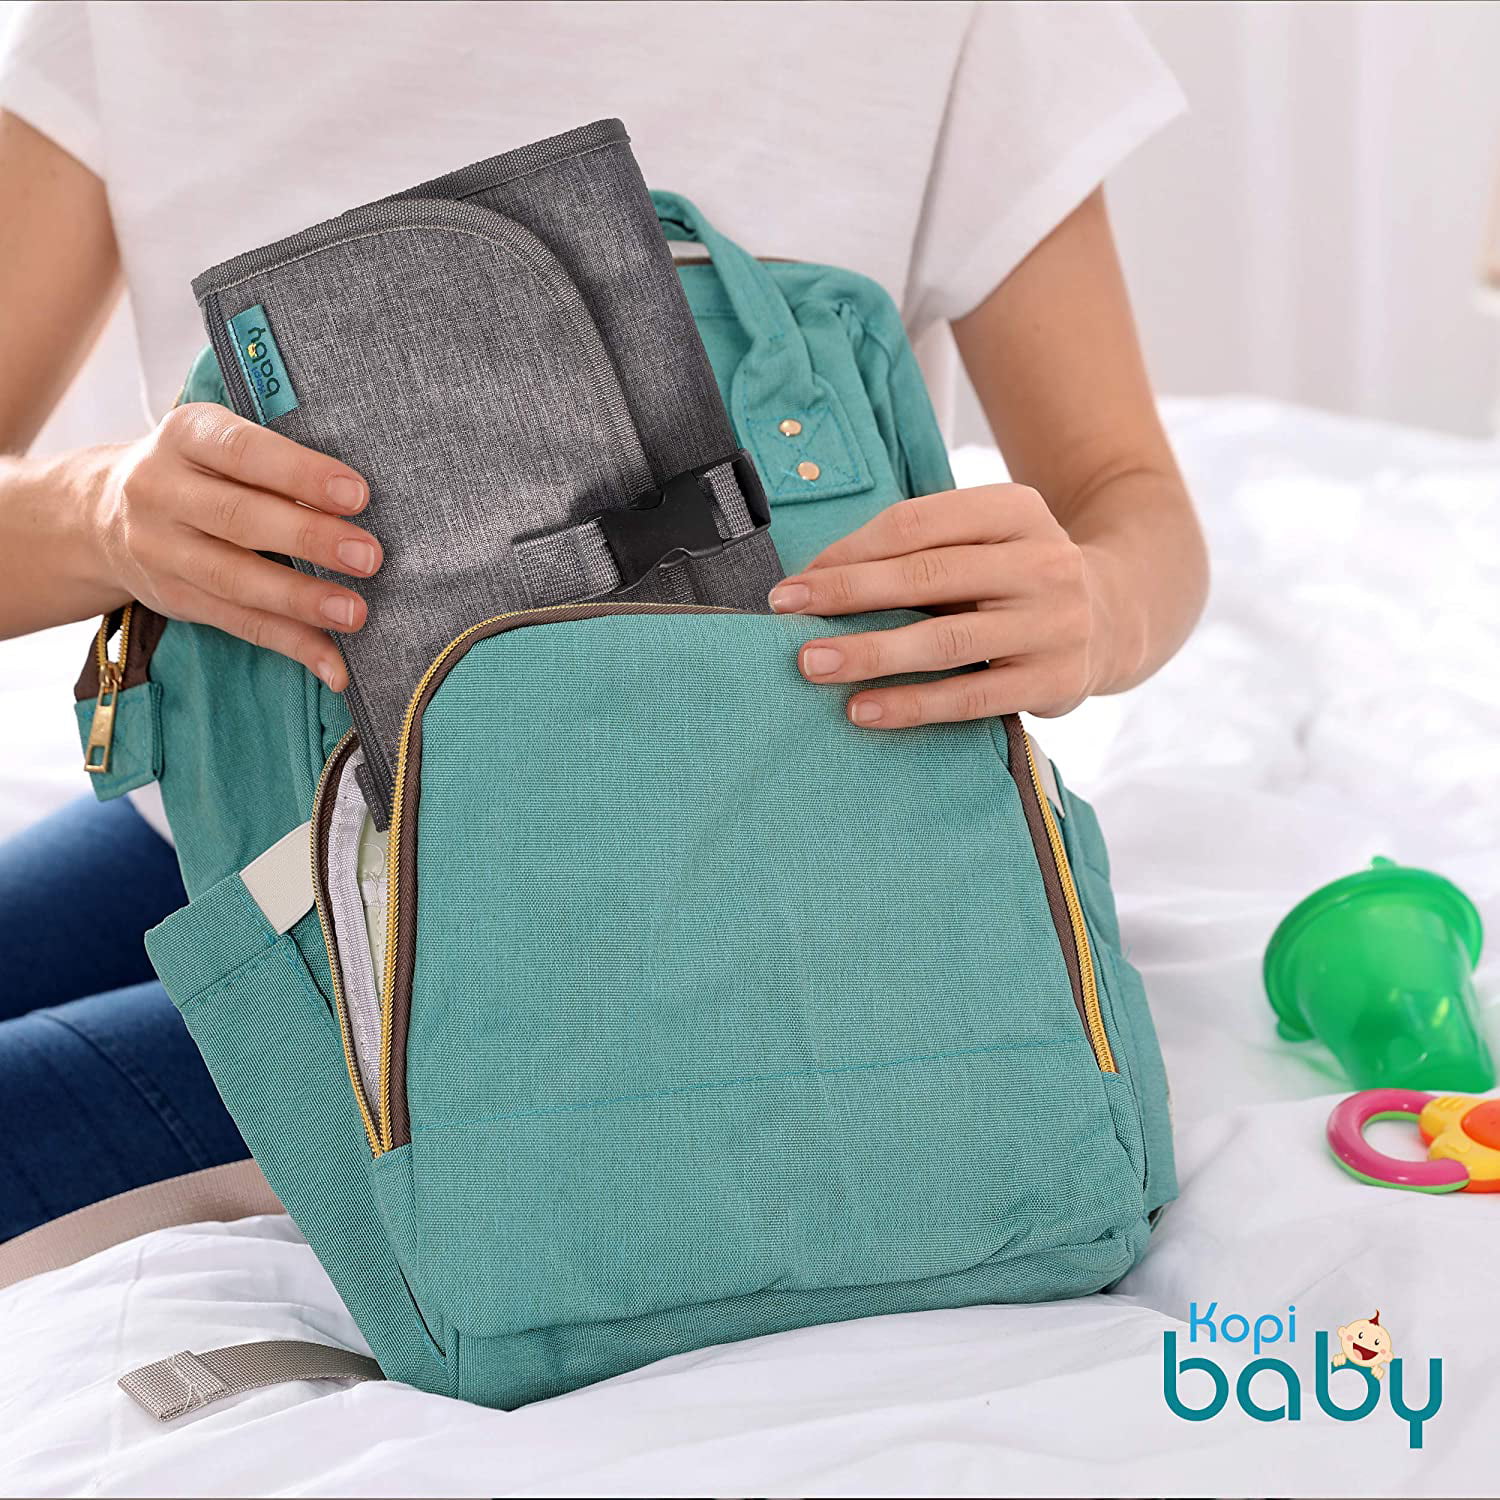 Portable Diaper Changing Pad with Built-in Head Cushion,Newborn Baby Changing Pad with Smart Wipes Pocket,Waterproof Travel Changing Mat Station kit,Baby Diaper Bag Shower Gift for Boys and Girls 